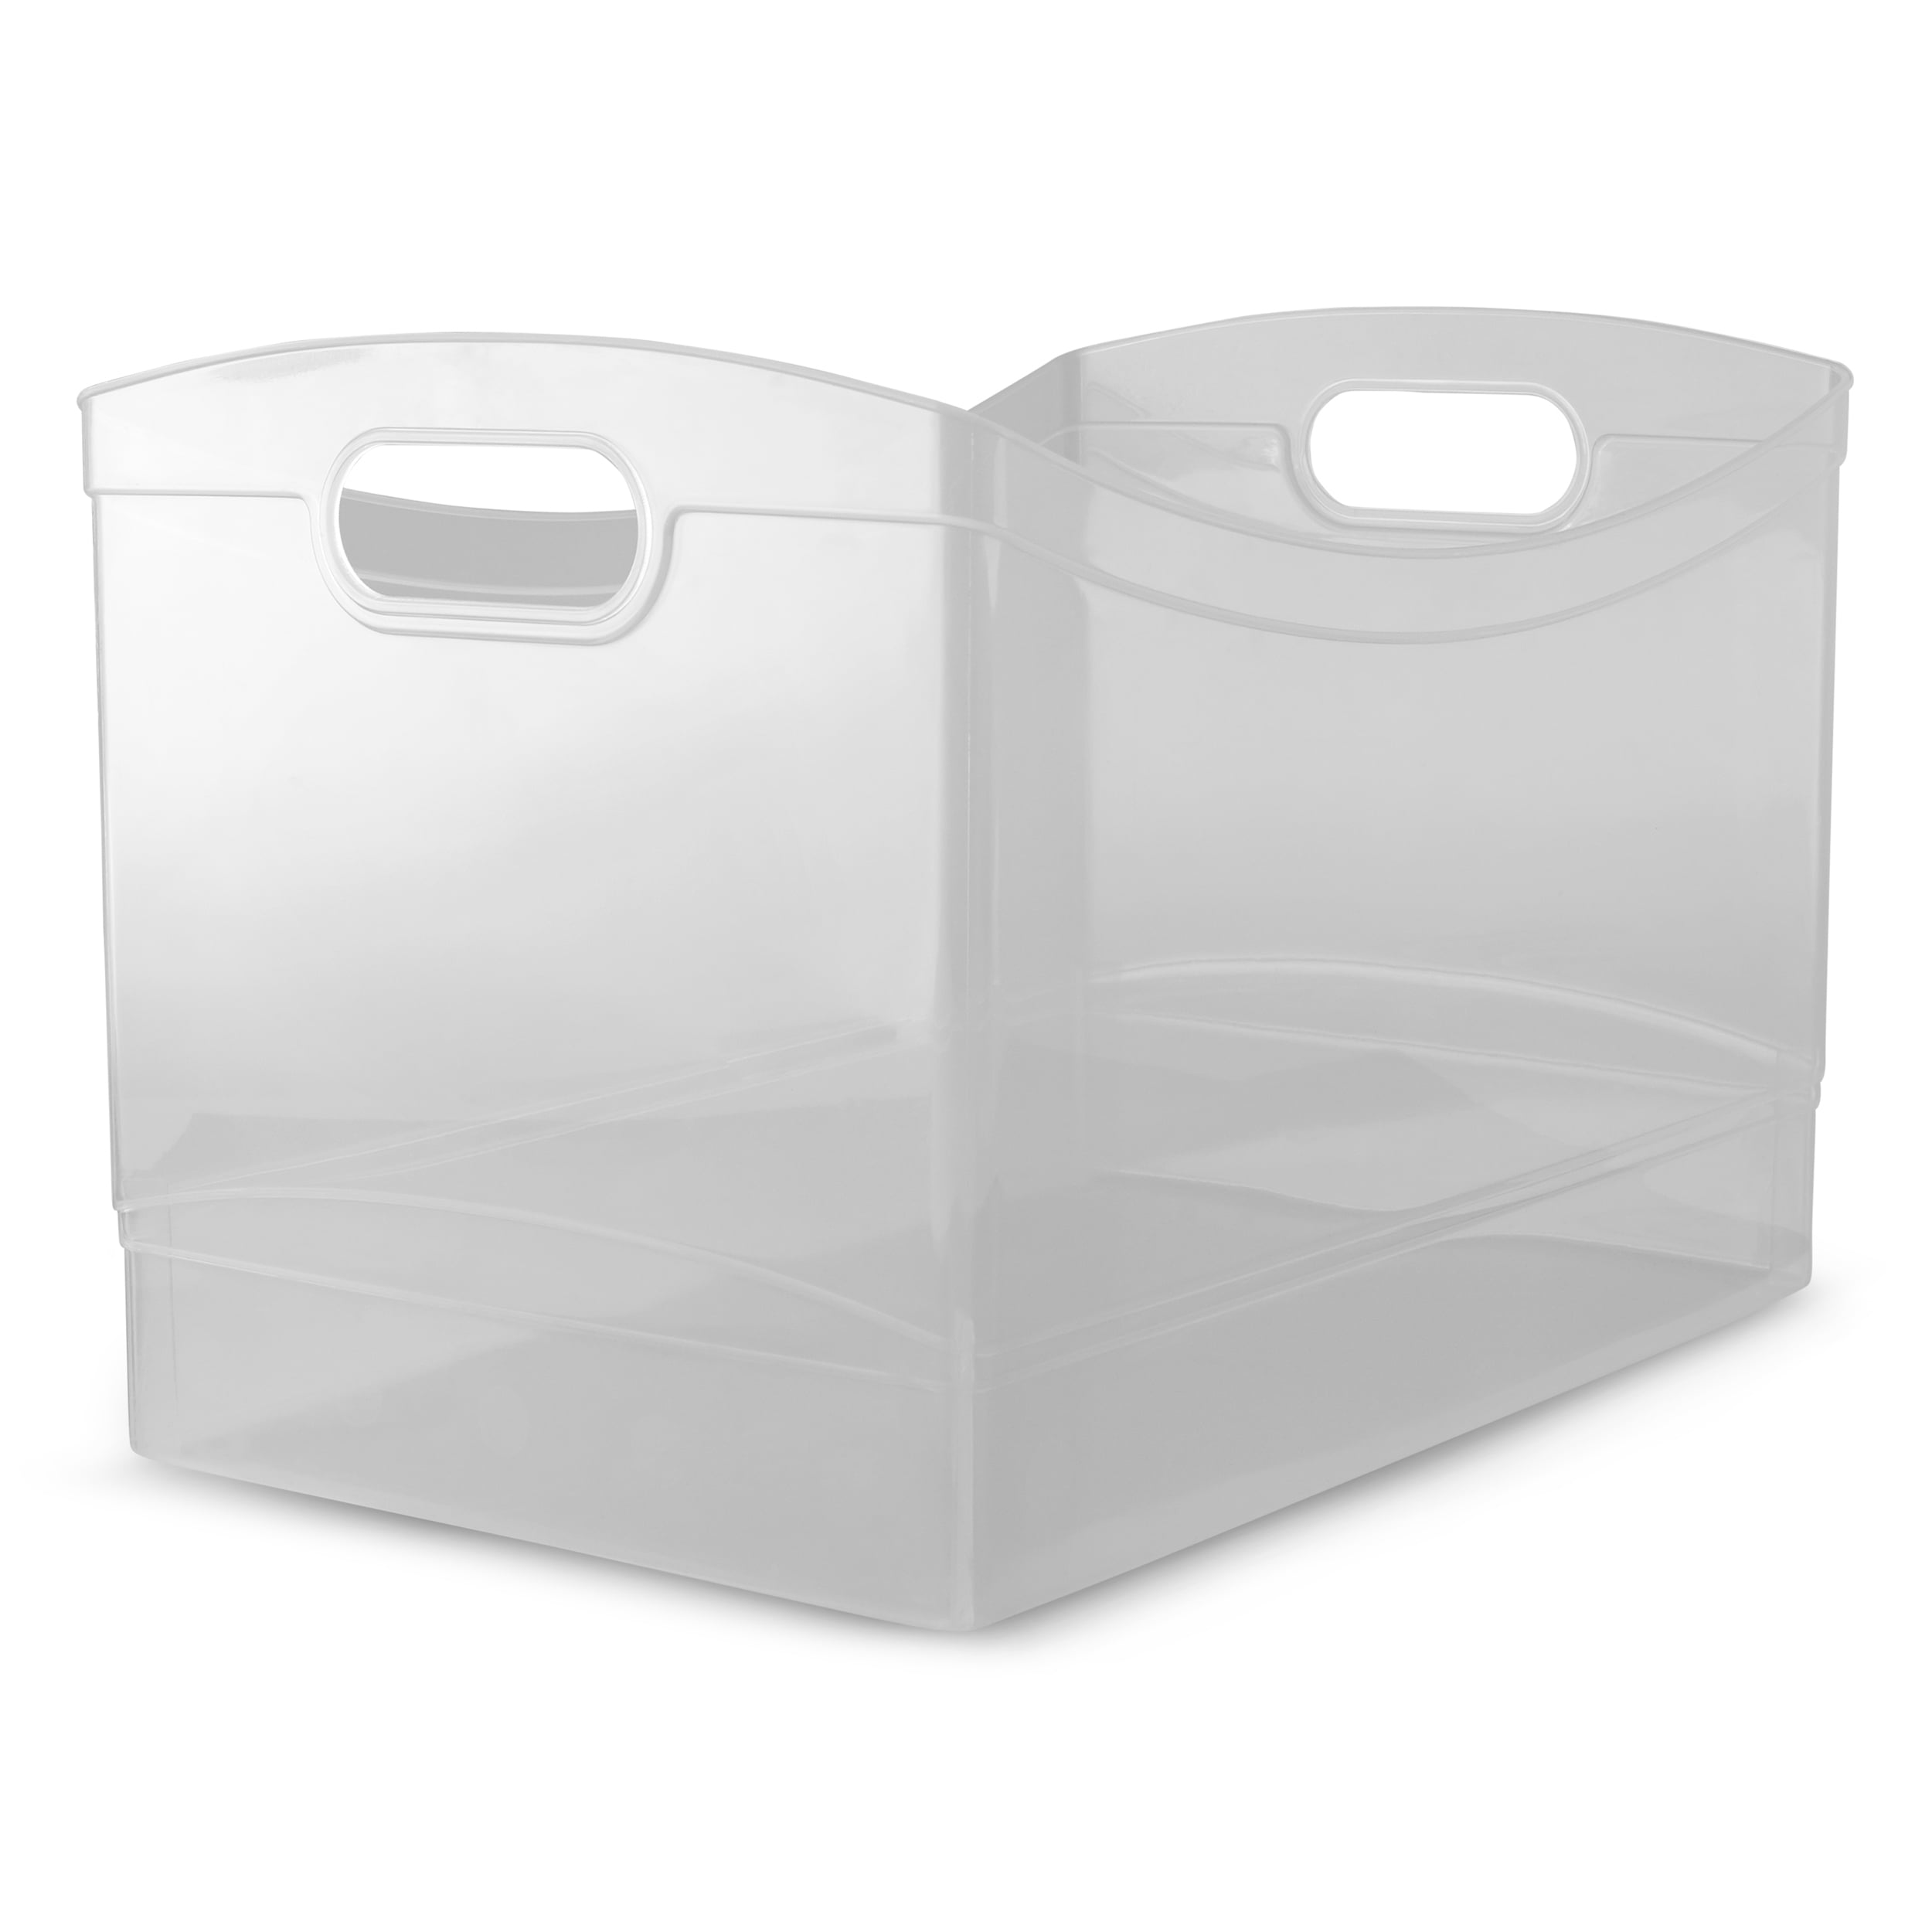 Acrylic Container With Lid : Target